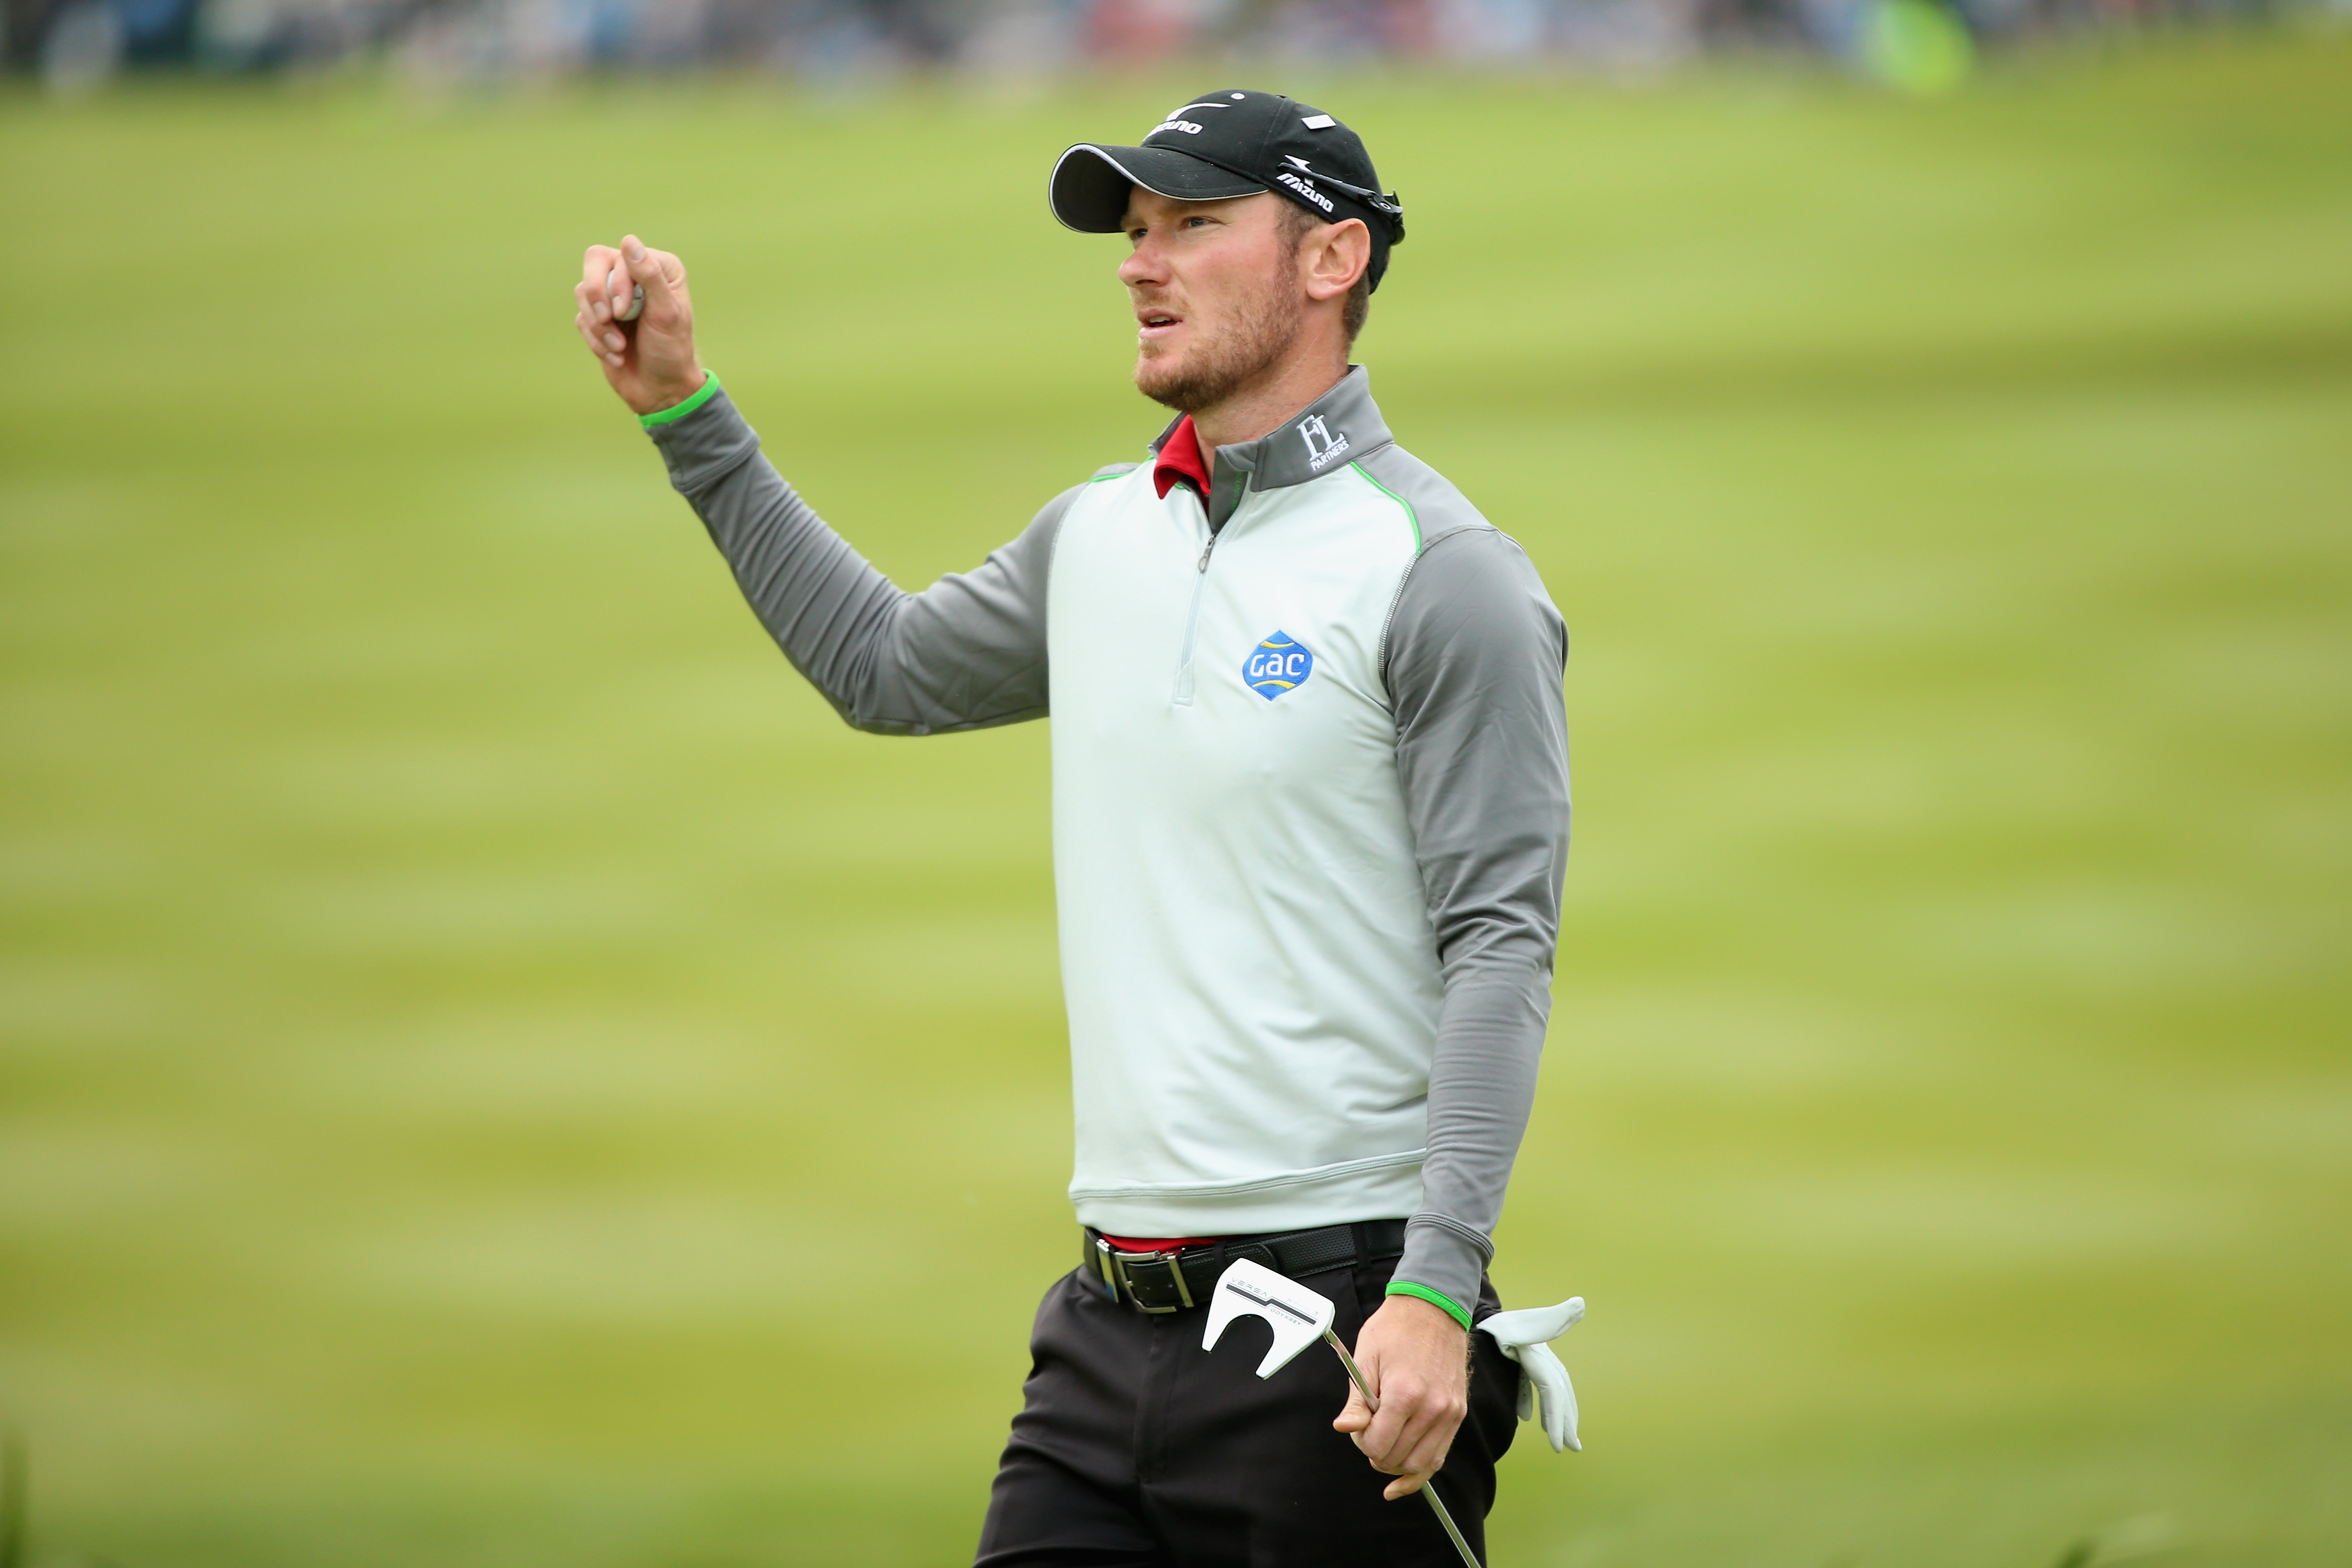 Gallery: BMW PGA Championship final round in pictures